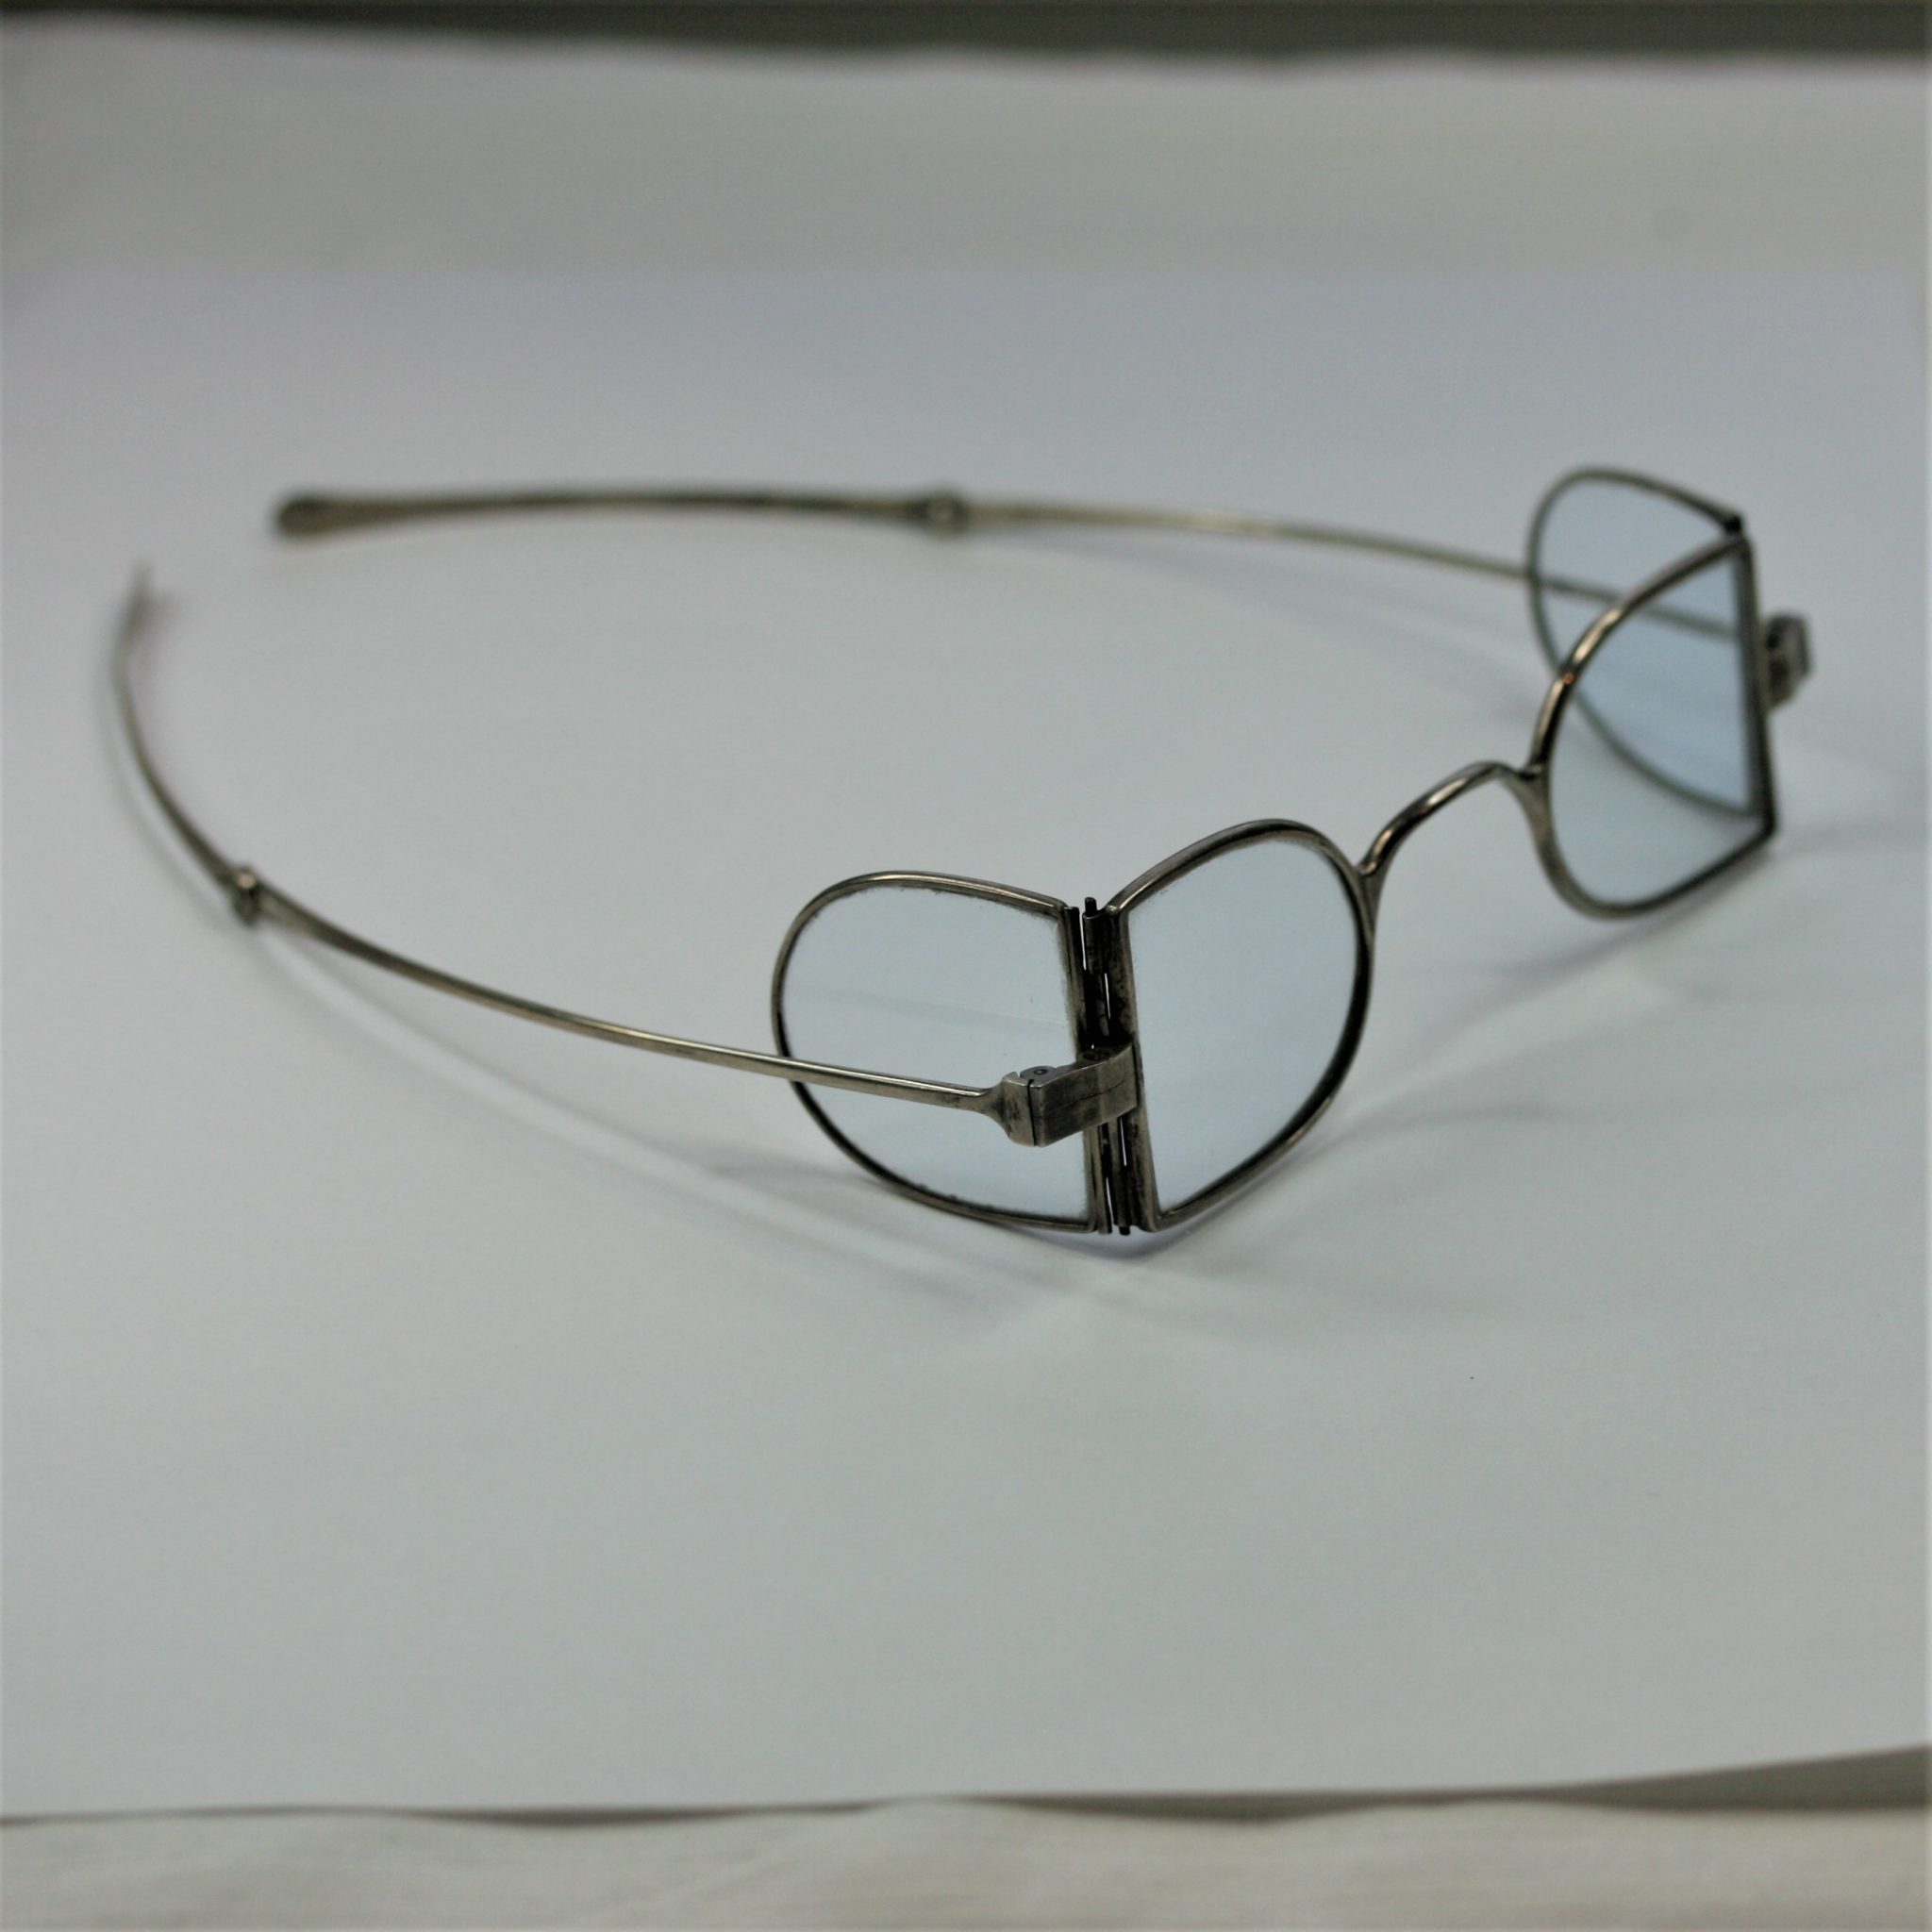 SILVER  4 LENS FOLDING SPECTACLES C1860 , IN GOOD CONDITION